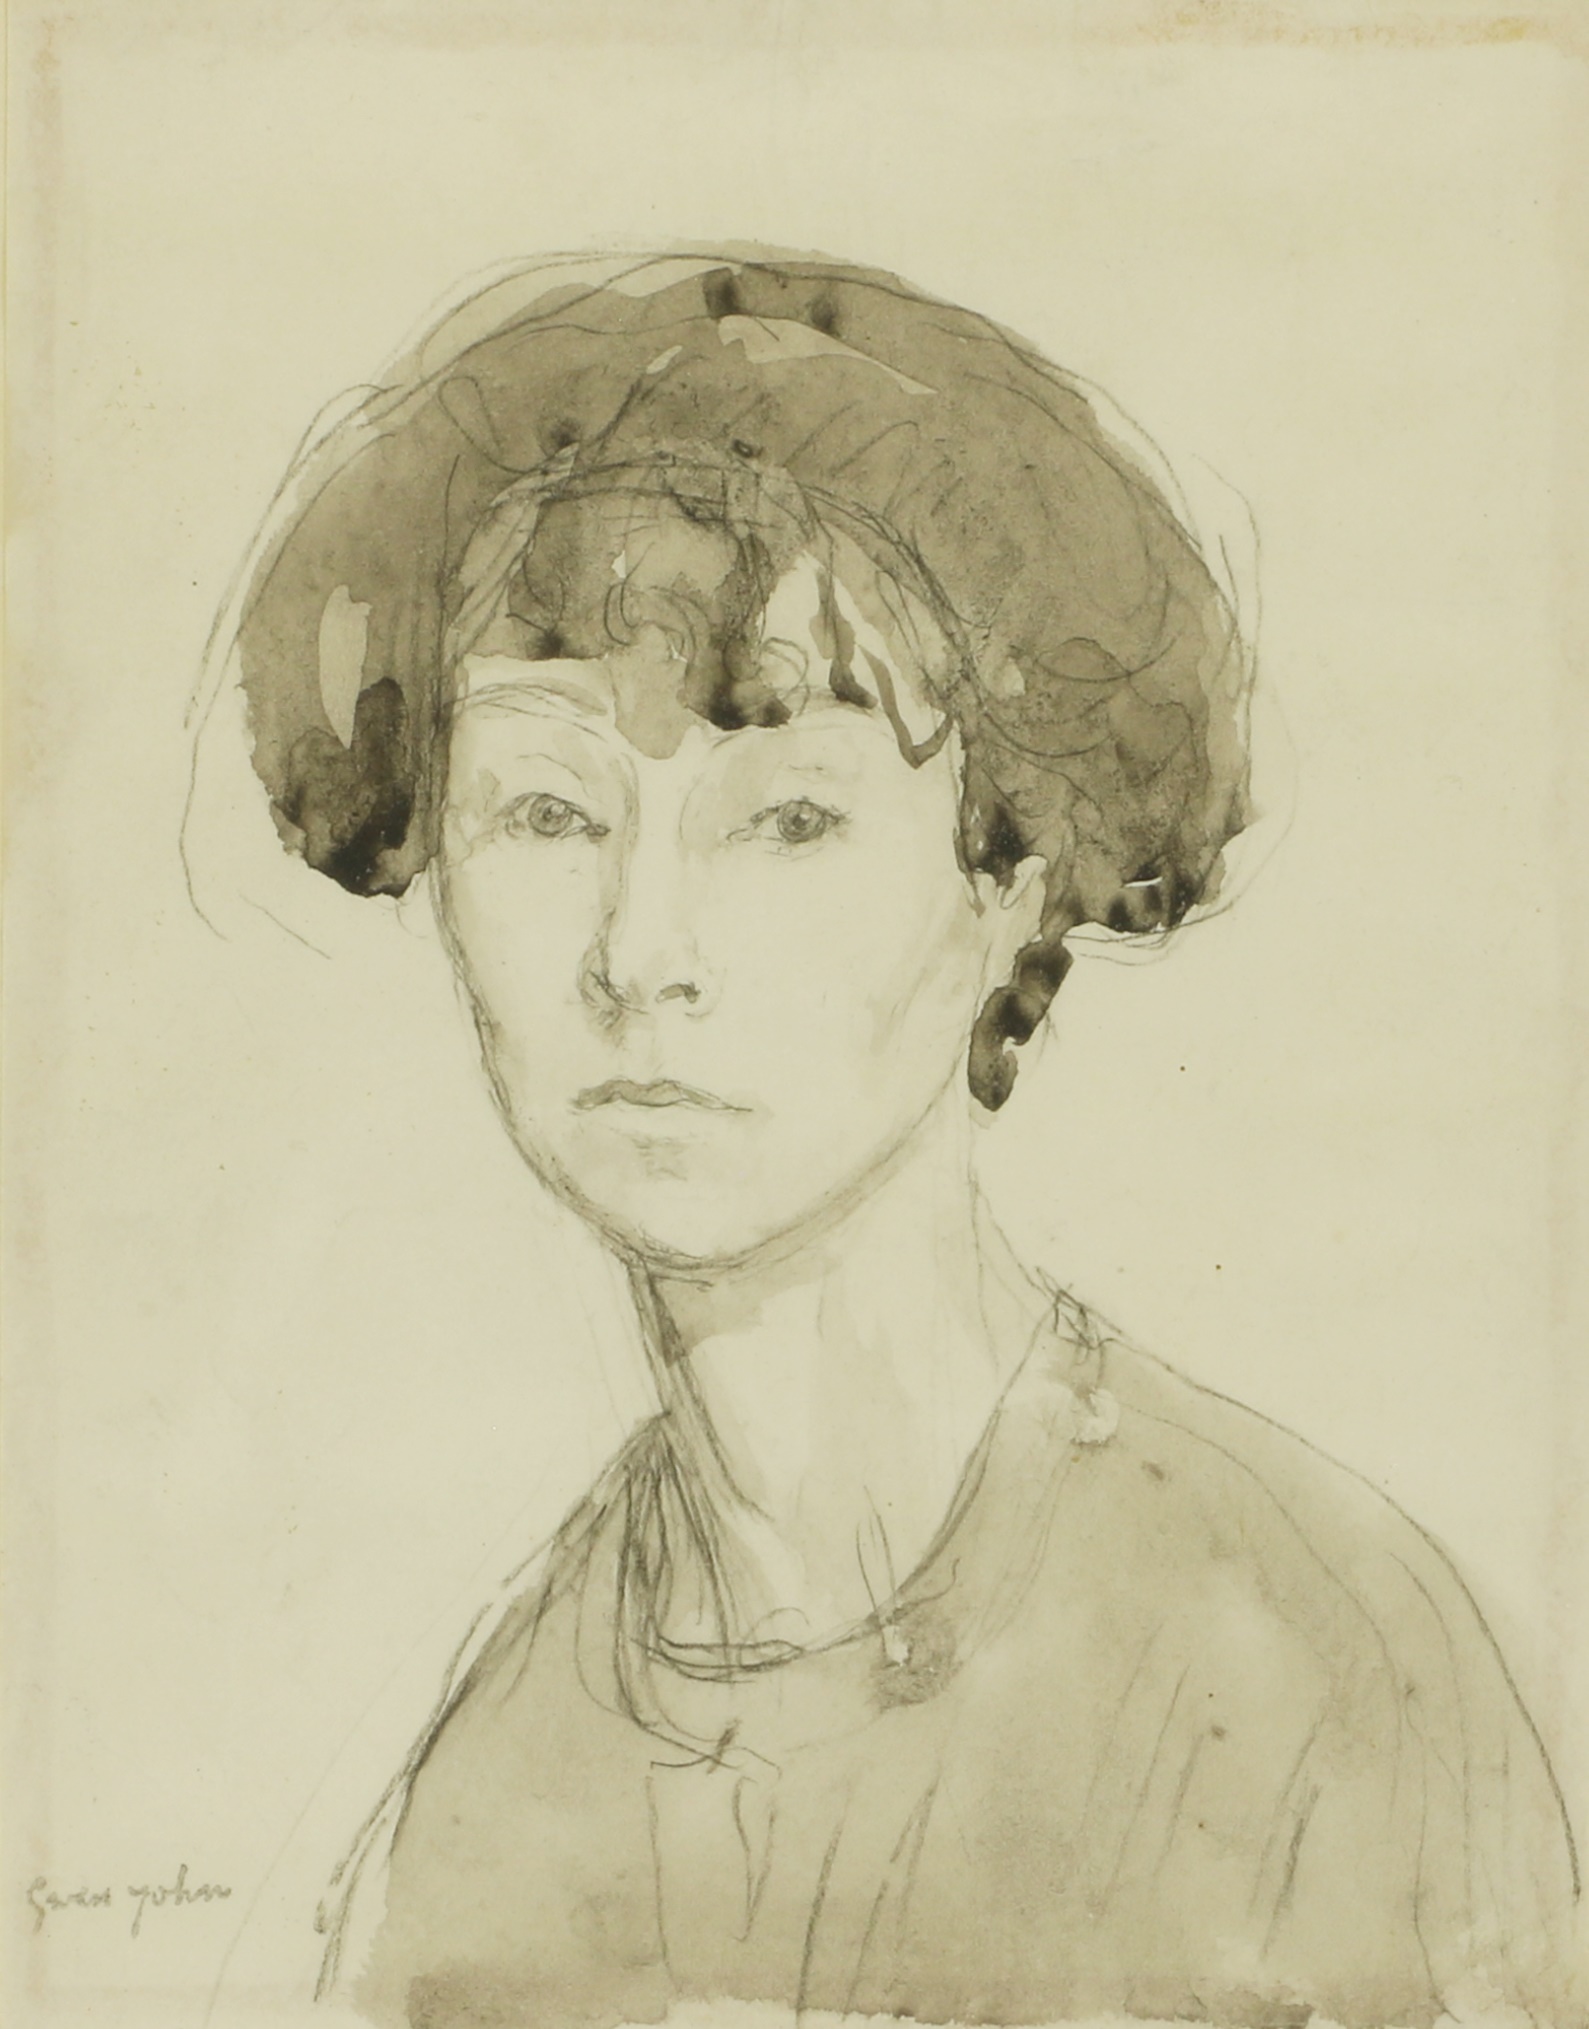 Gwen John (1876-1939) Portrait of Chloë Boughton-Leigh, bust-length signed 'Gwen John' l.l., pencil and grey washes 20 x 15cm